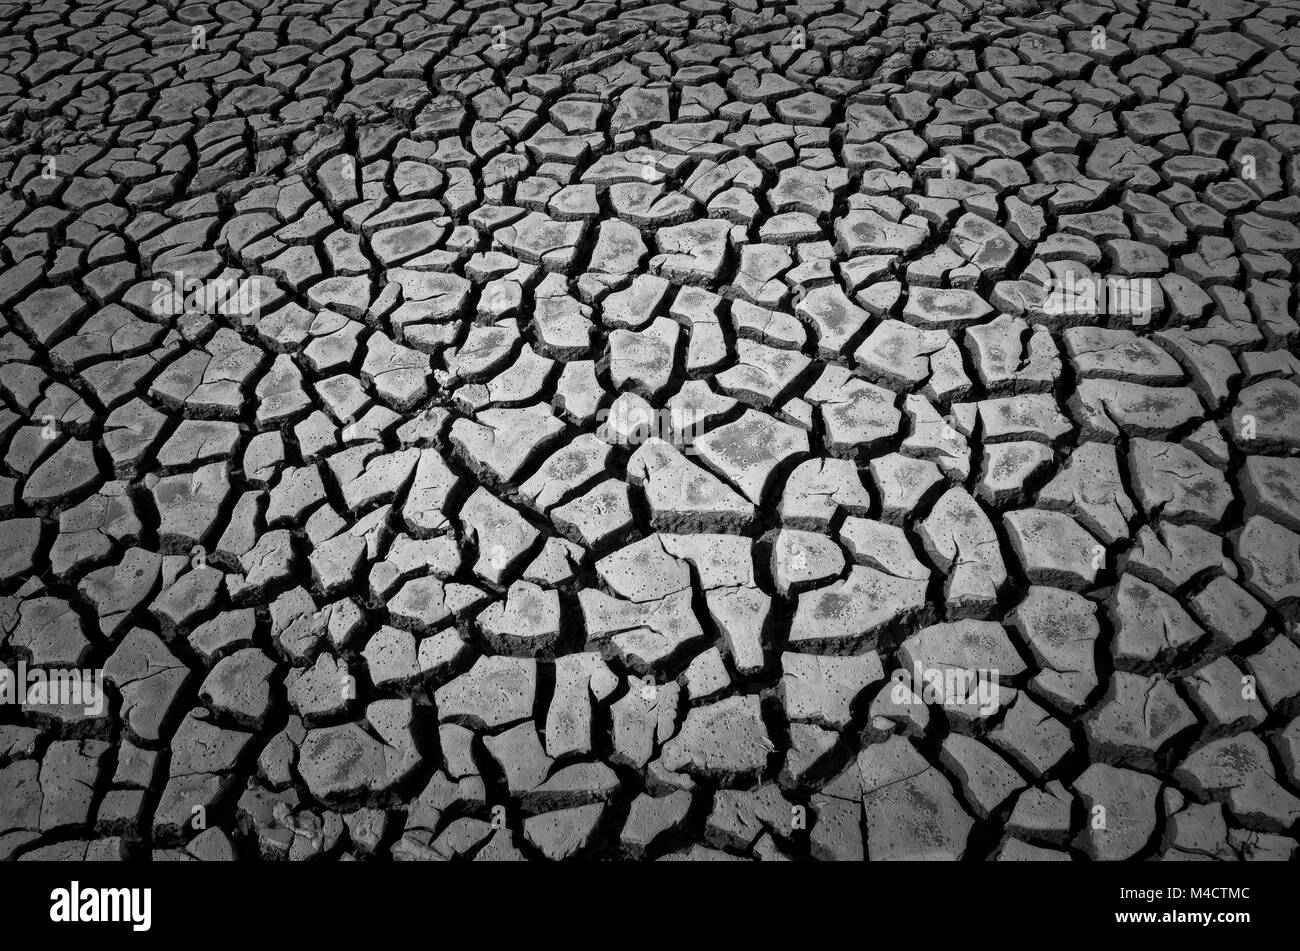 soil drought cracks texture background for design. black and white picture Stock Photo